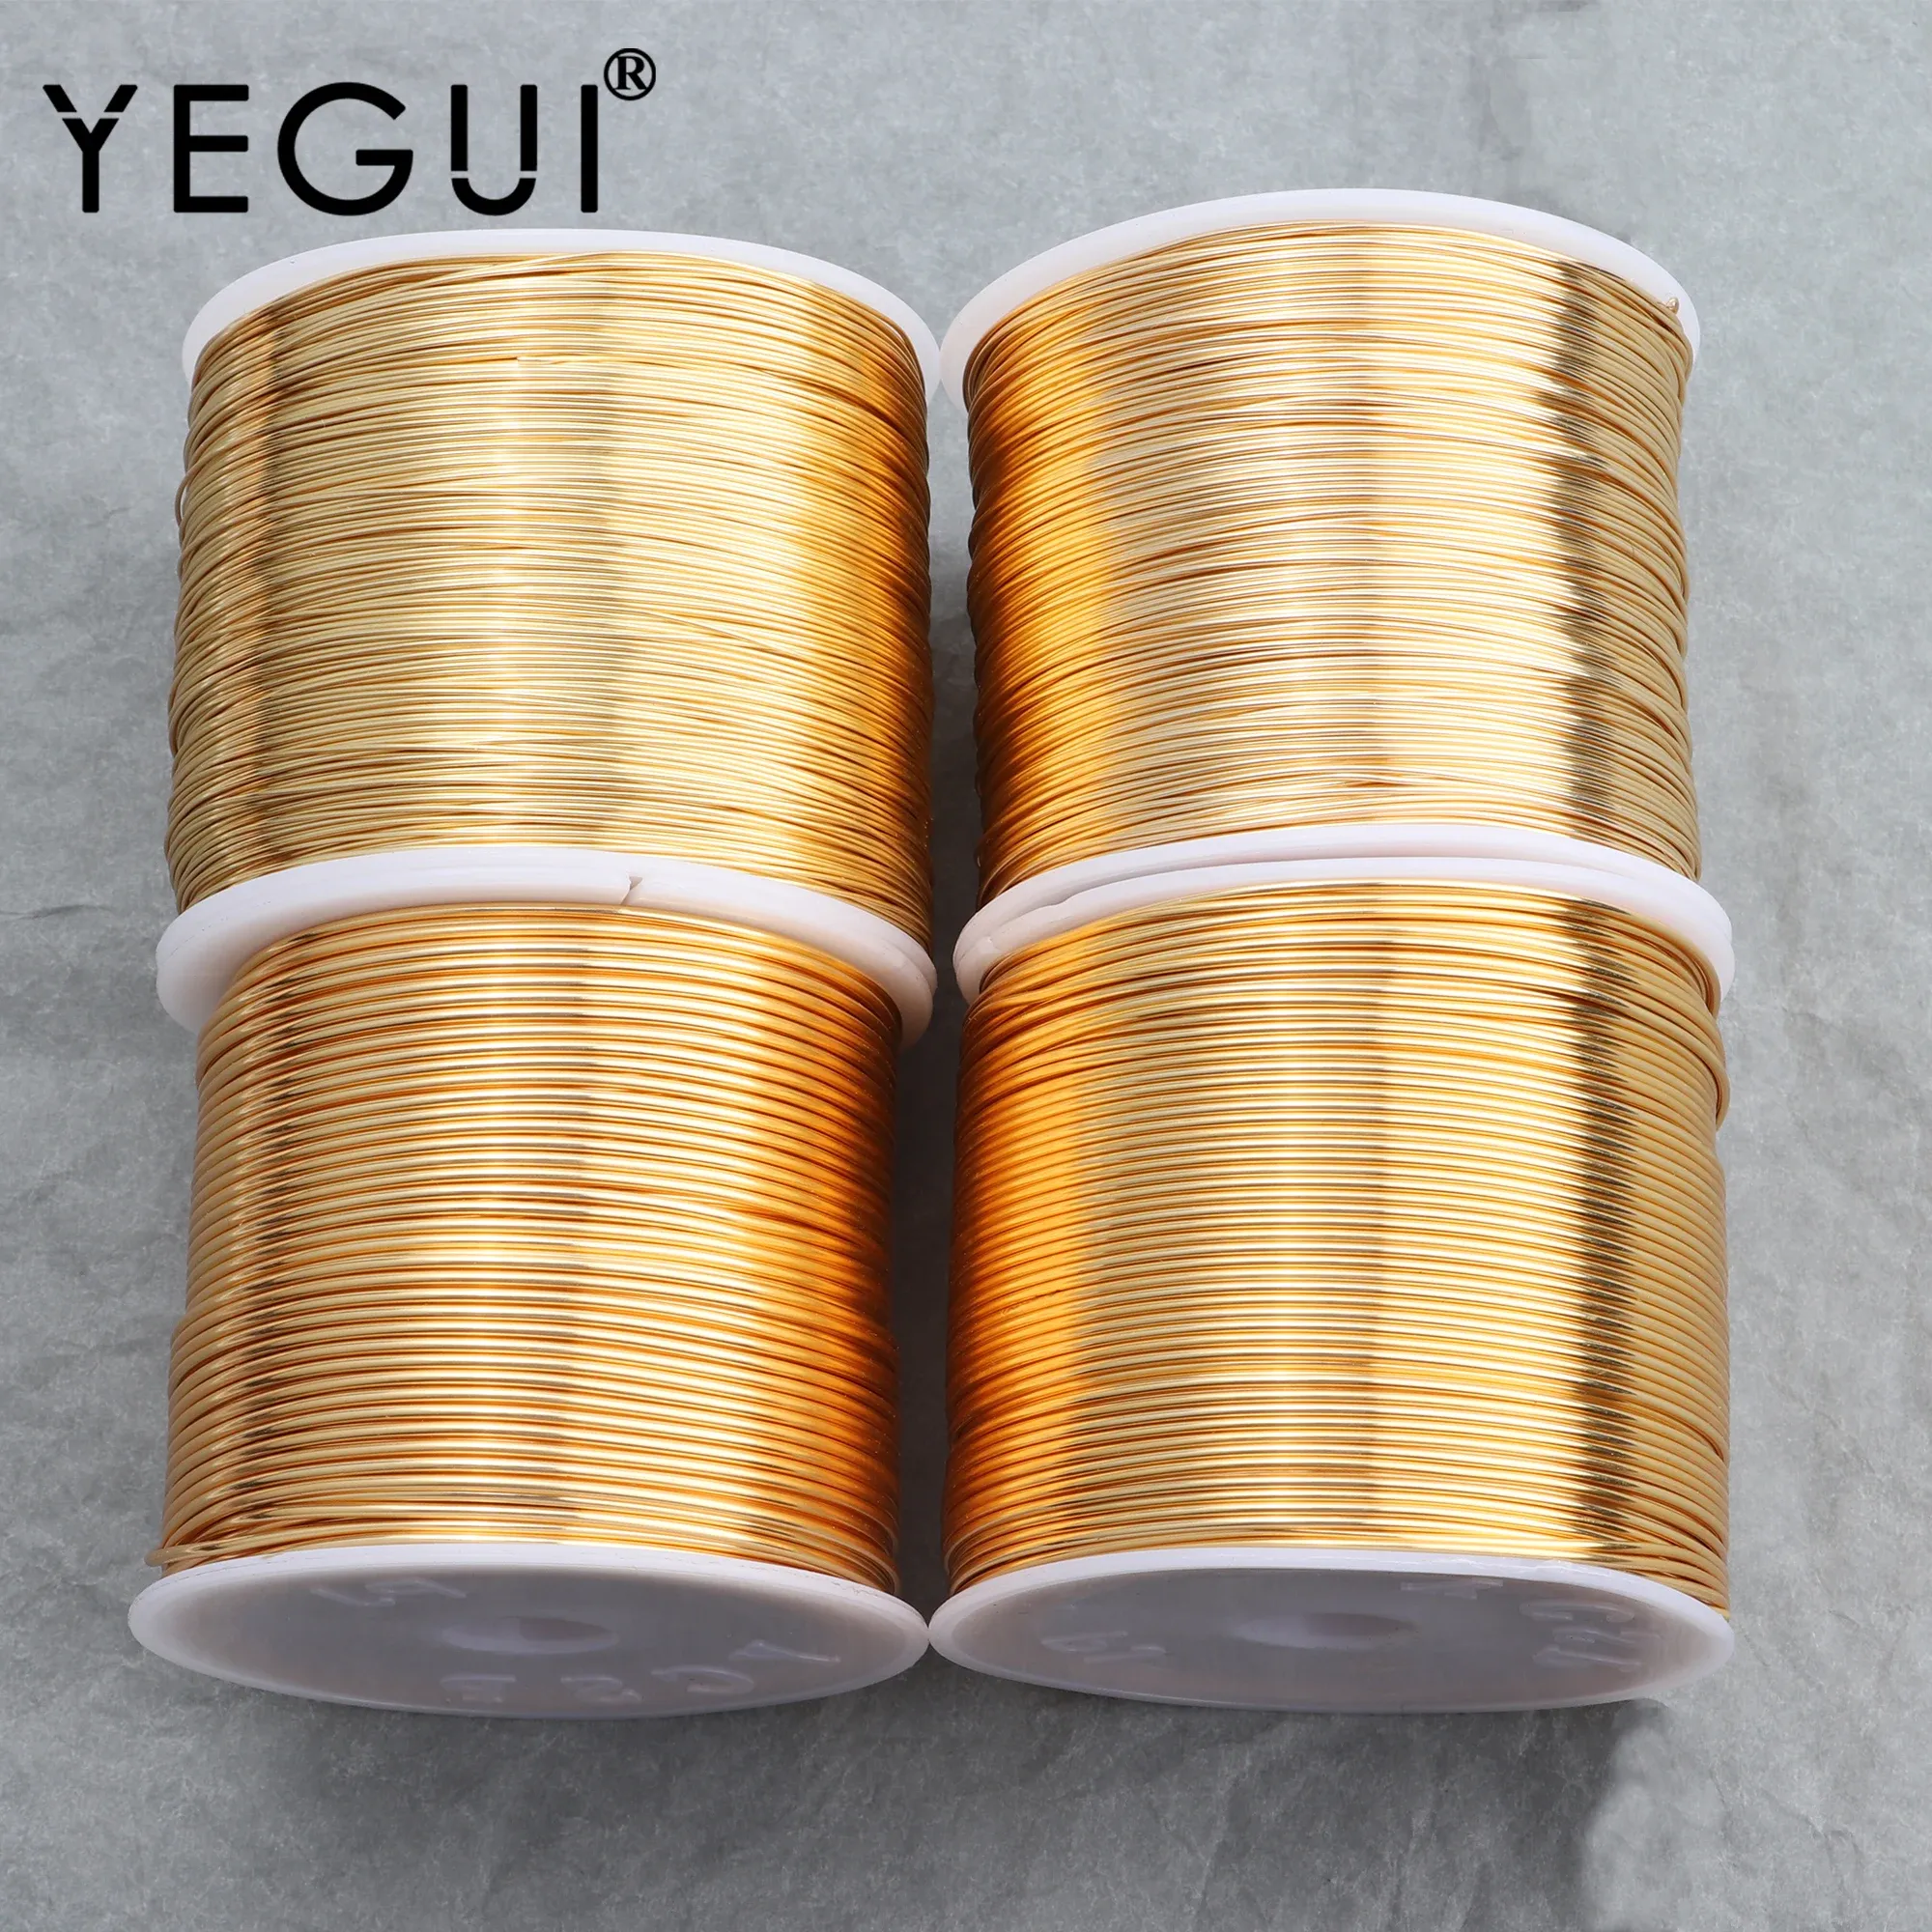 Strands YEGUI M754,jewelry accessories,copper wire,18k gold plated,0.3 microns,jewelry making,diy bracelet necklace,one roll/lot